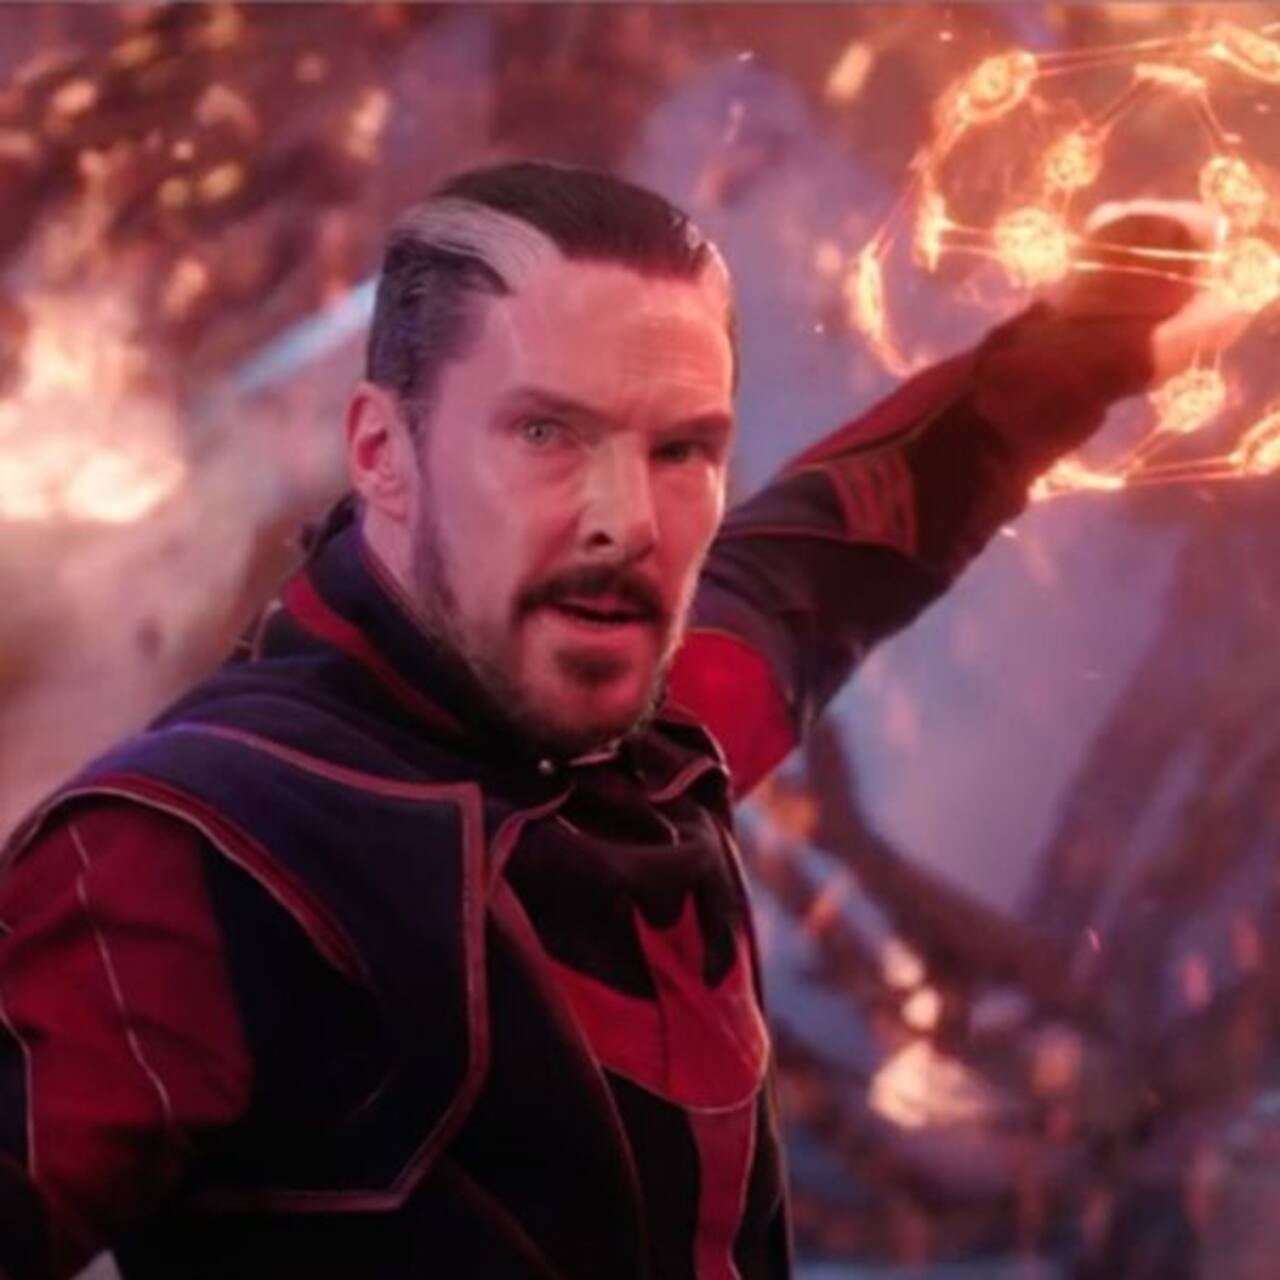 Doctor Strange 2 box office collection day 1: Benedict Cumberbatch starrer tracking for astounding Rs 30 crore+ opening but will just fall short of Spider-Man